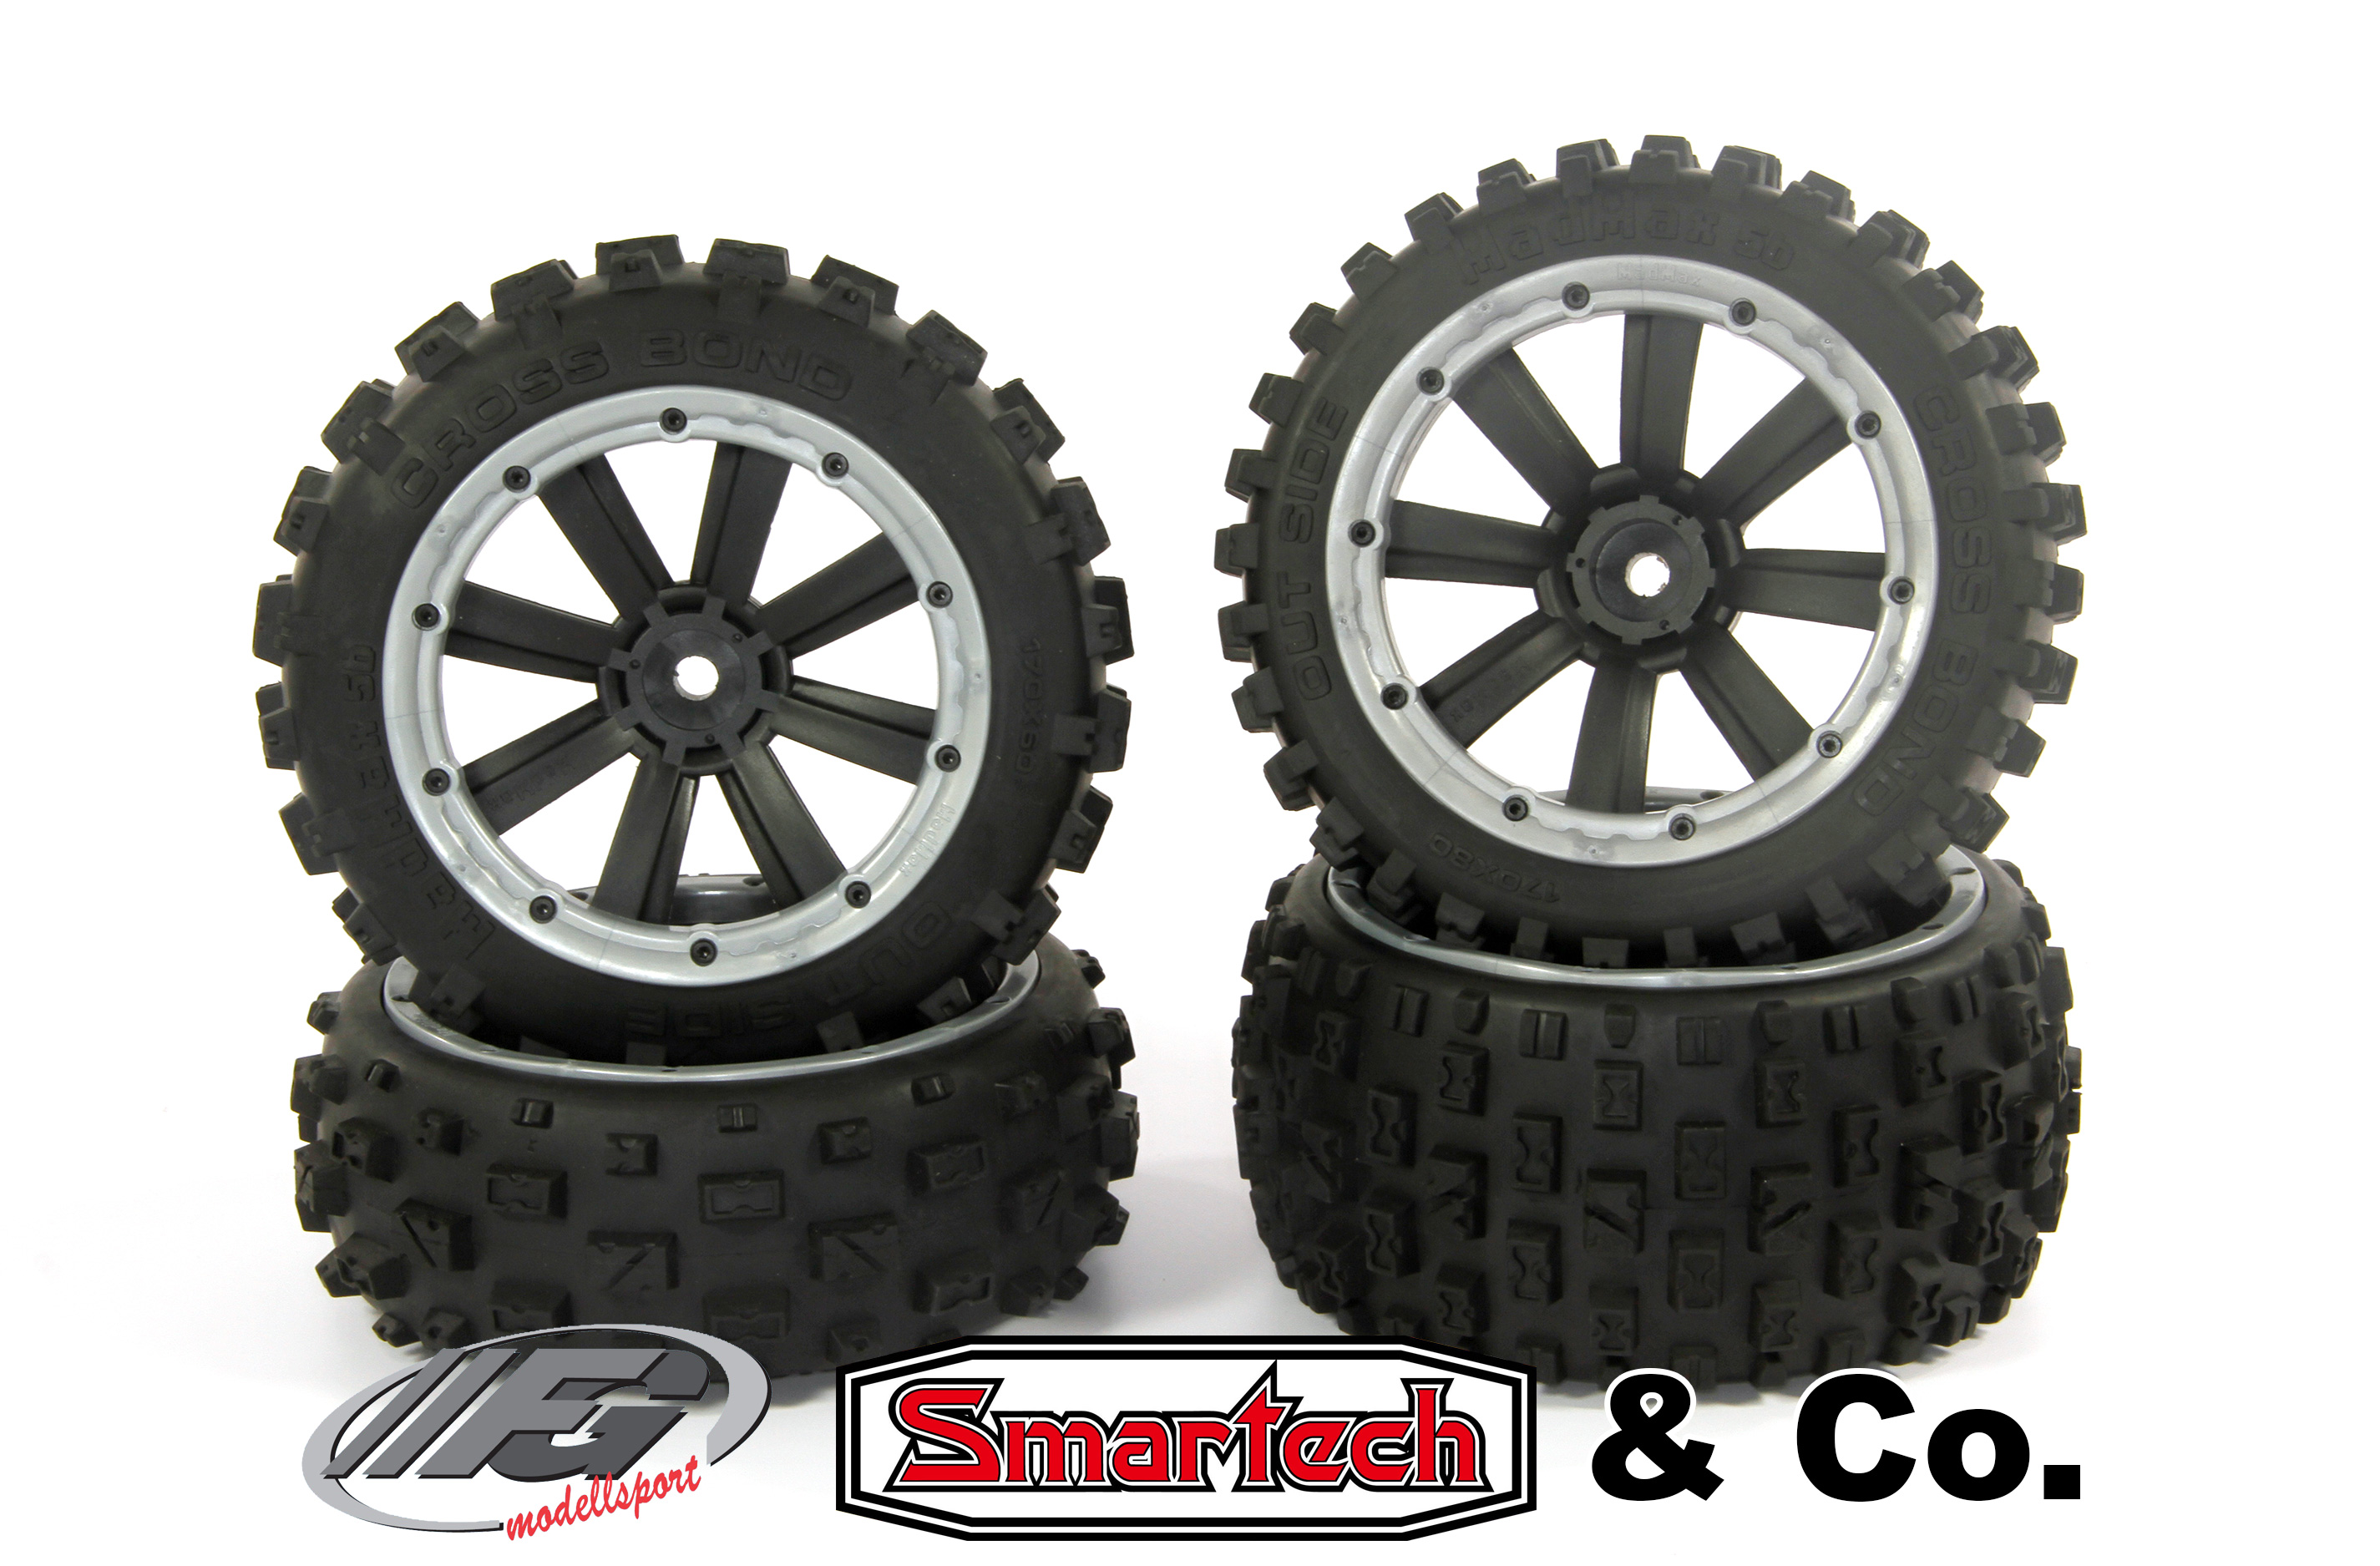 y1402/01 MadMax CROSS BOND 170x80/x60 tires for FG/Smartech and other (18 mm square drive) Offer